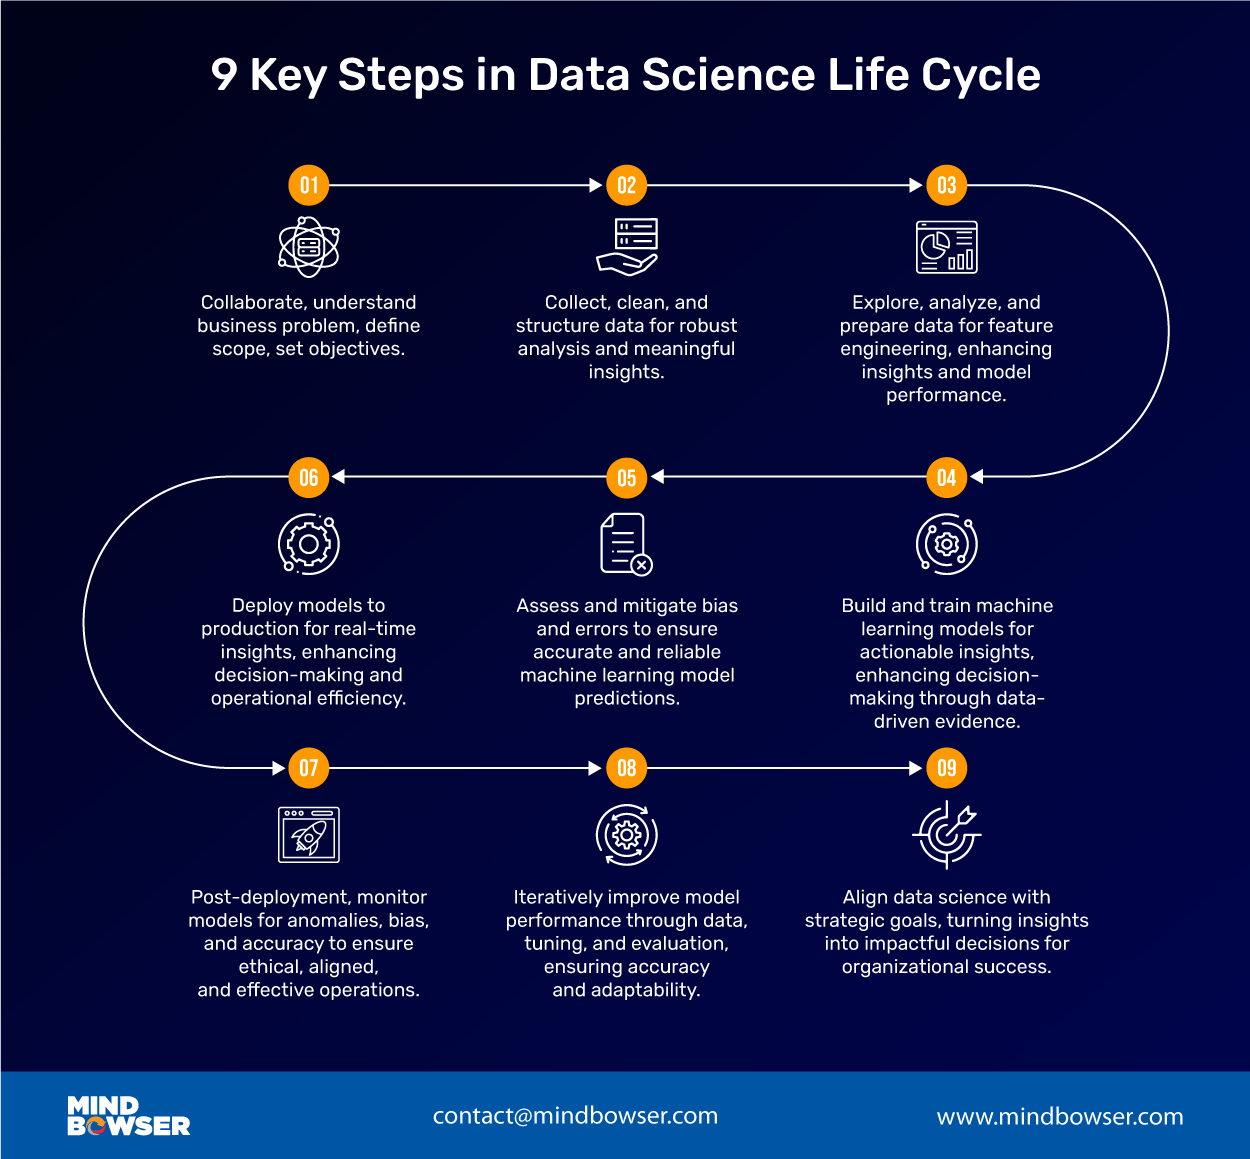 Steps for Data Science Life Cycle